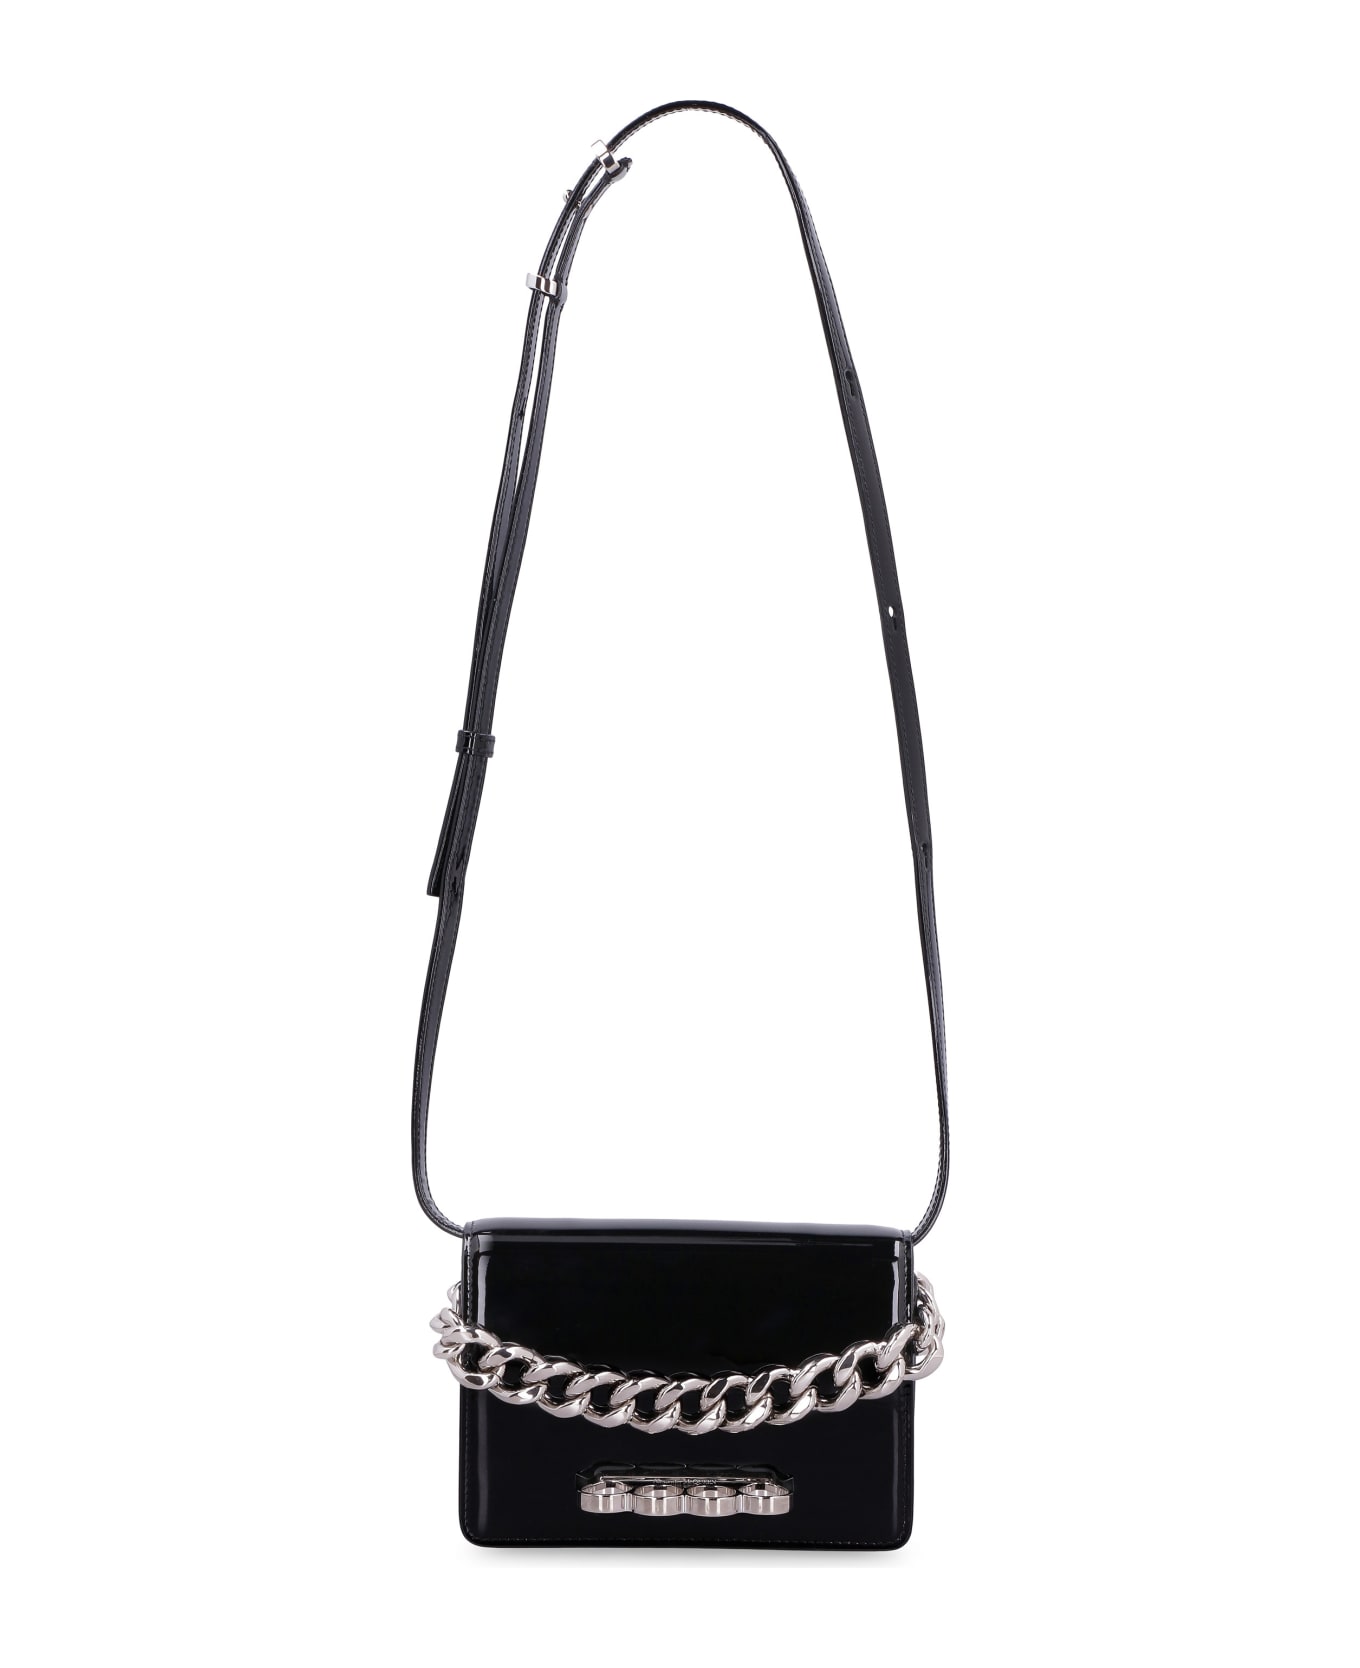 Alexander McQueen The Four Ring Mini Patent Leather Bag - Black ショルダーバッグ